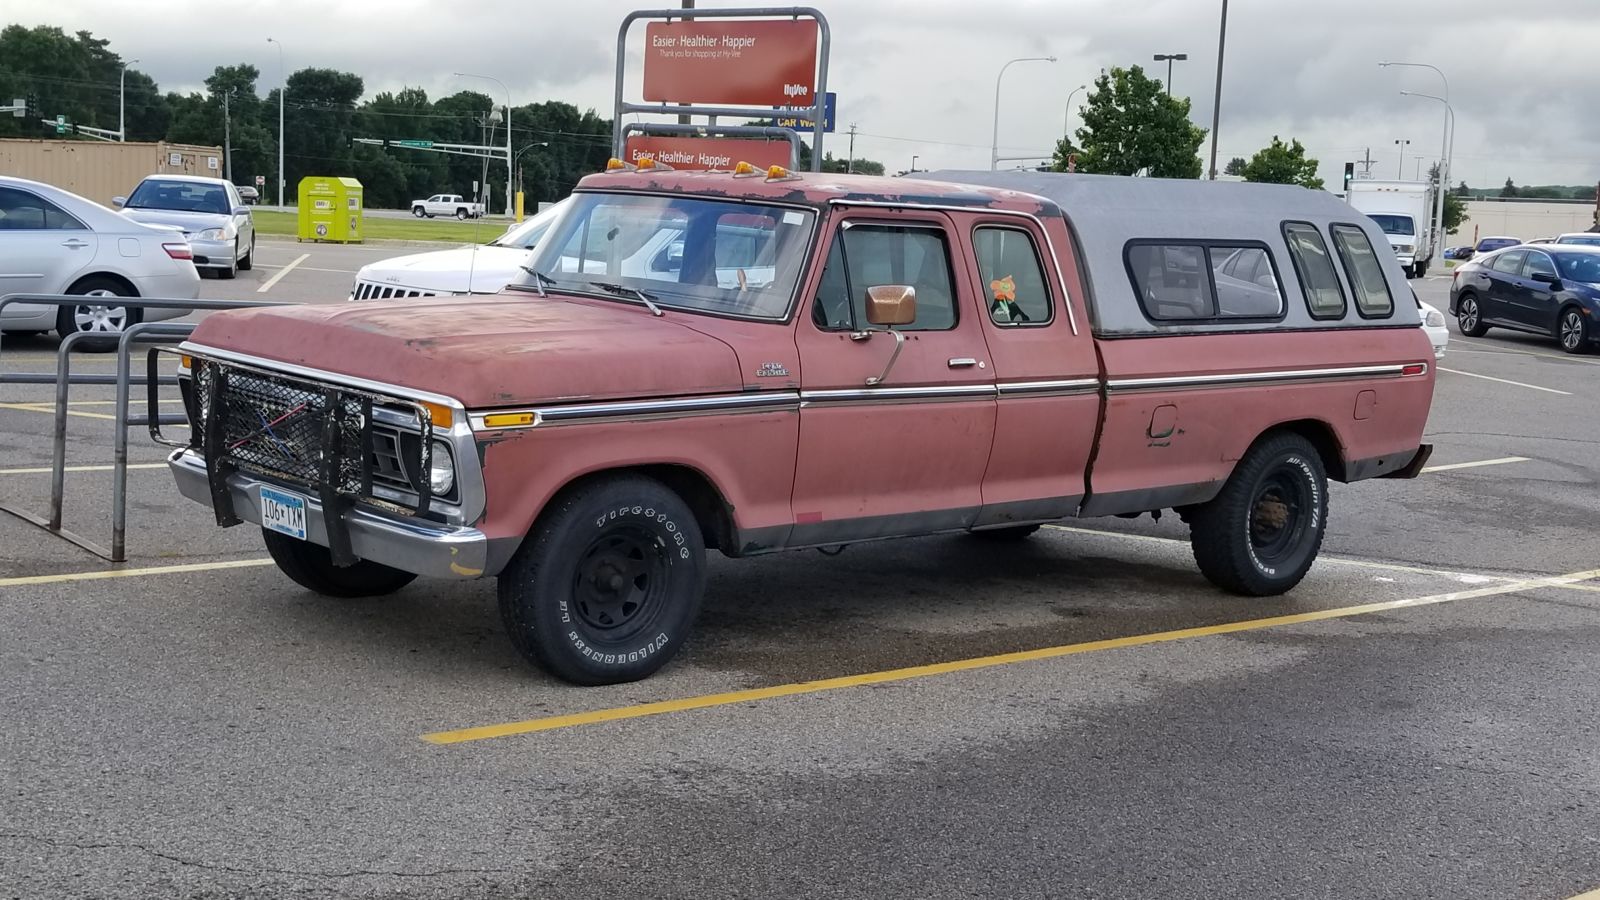 This claims to be and F250 but has 5 bolt front wheels?